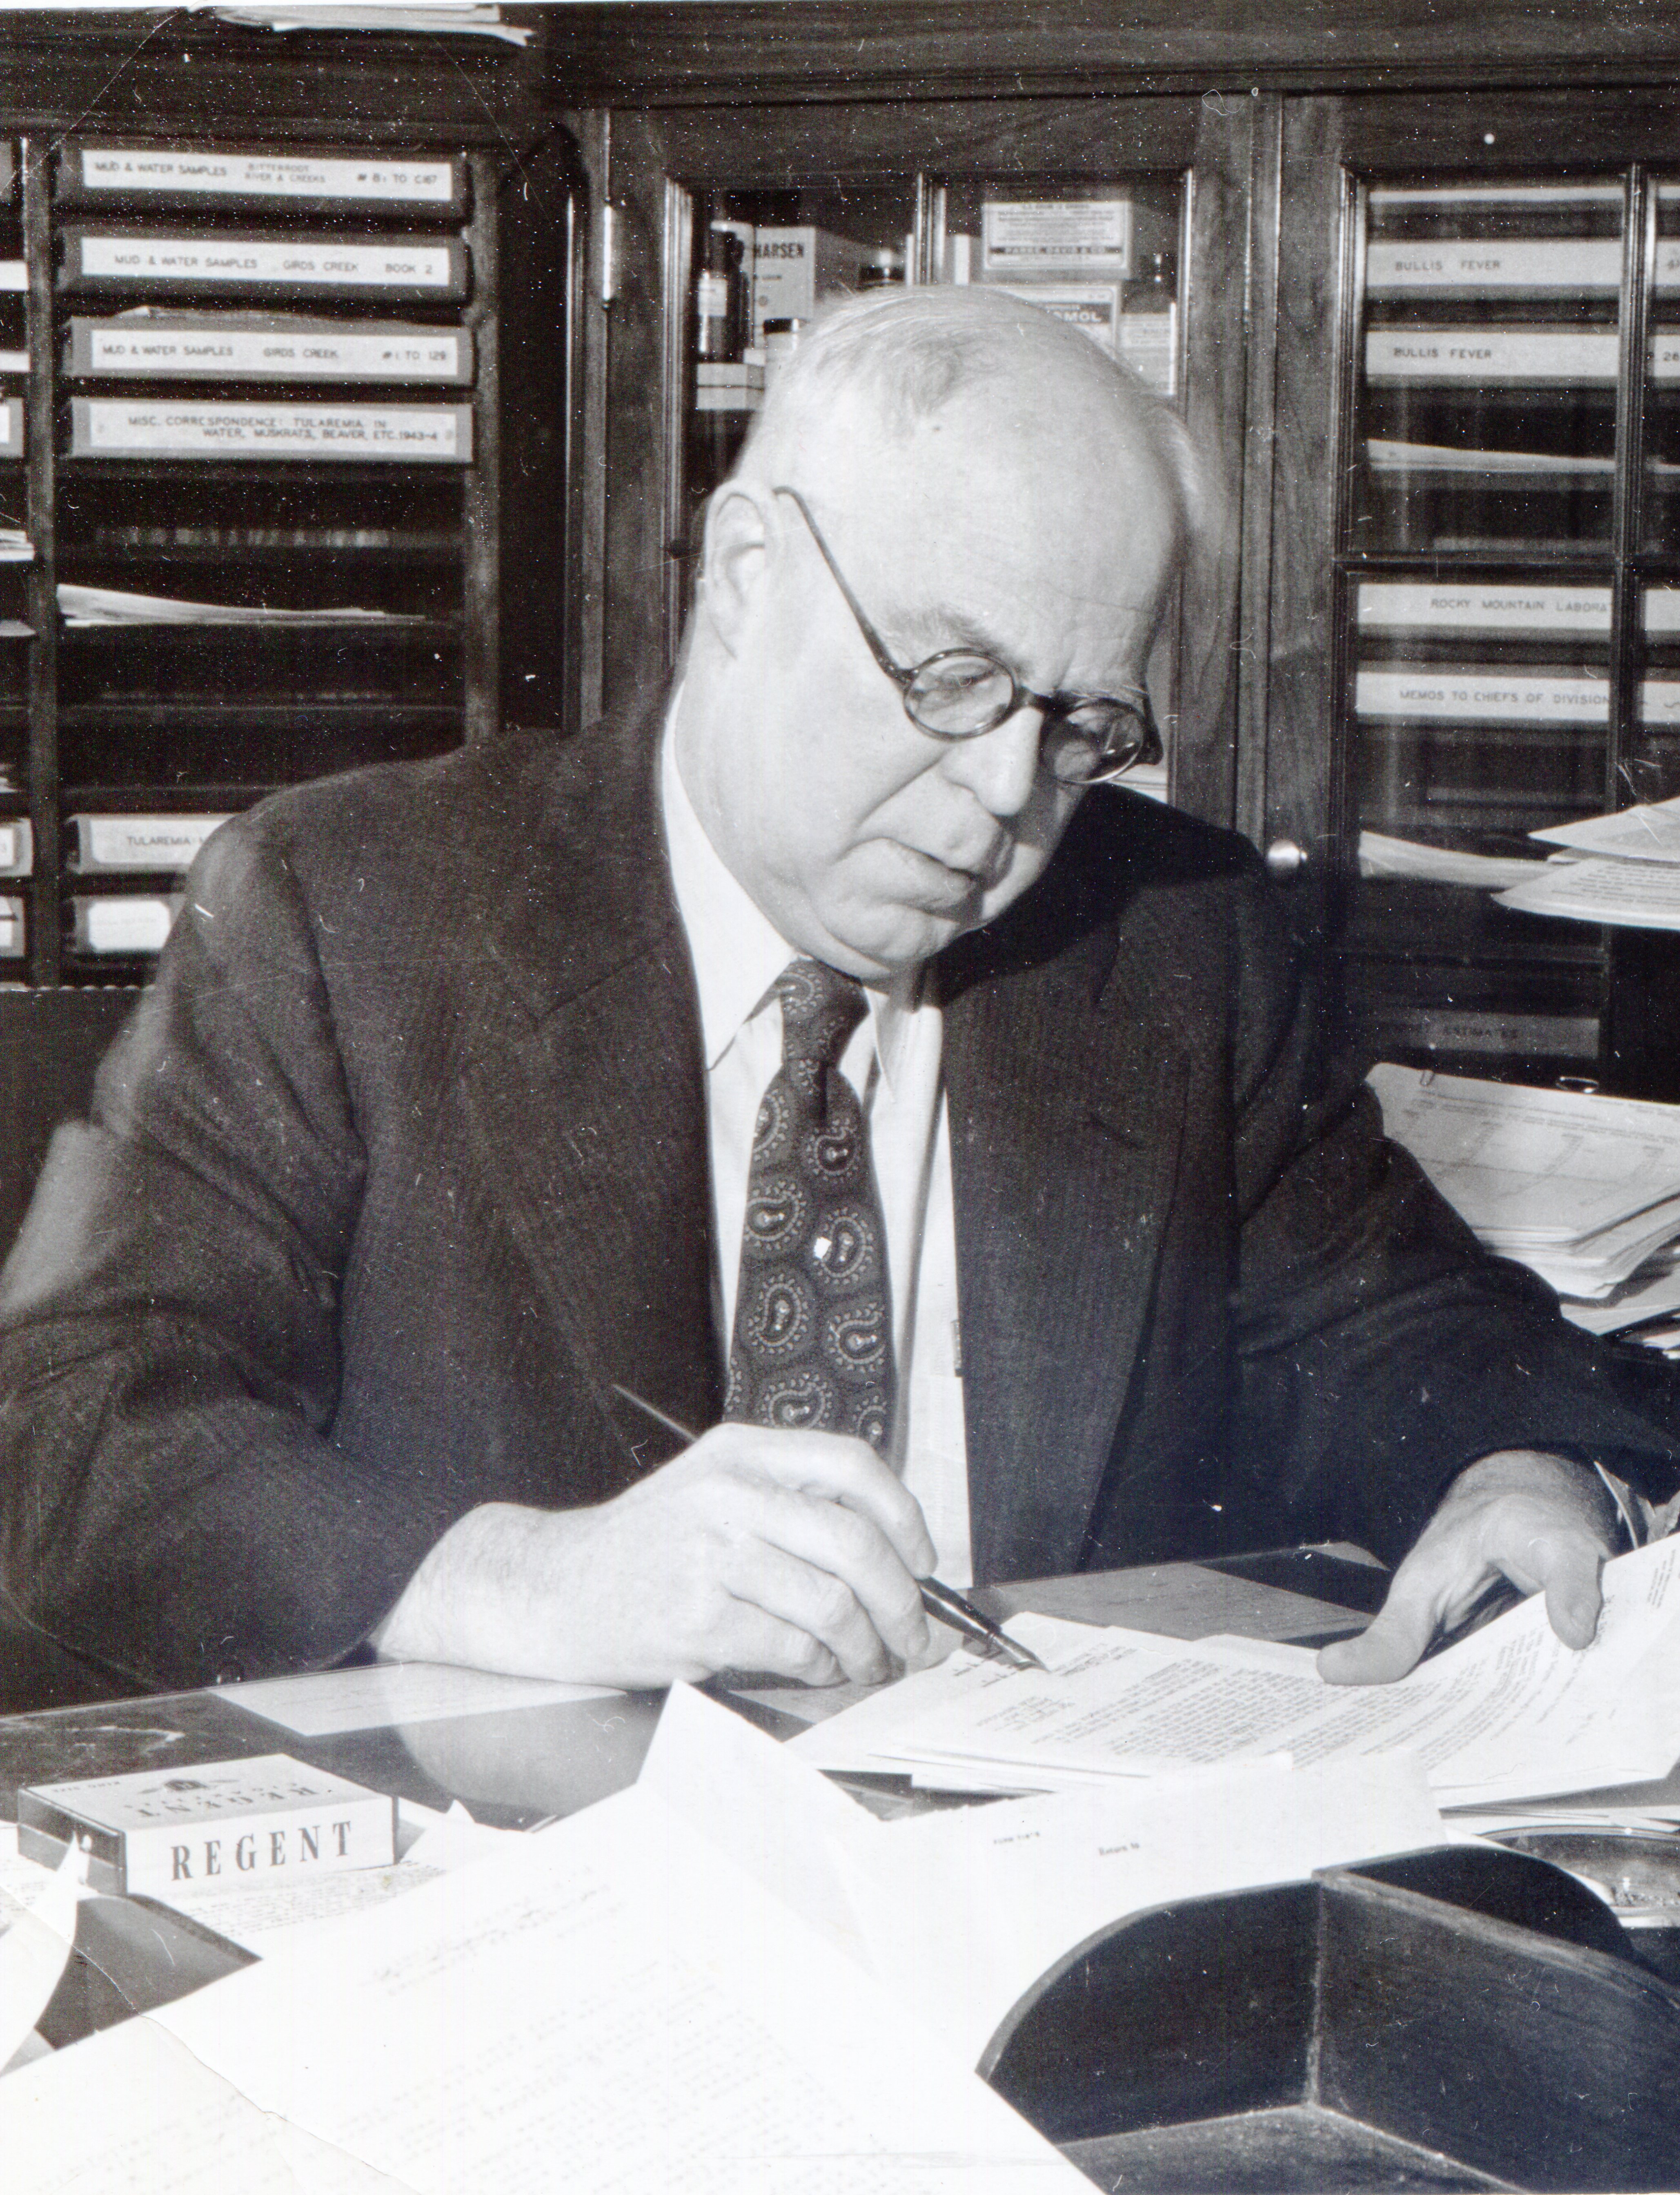 Ralph Parker sits at his desk in a nice suit, editing an article with a pen